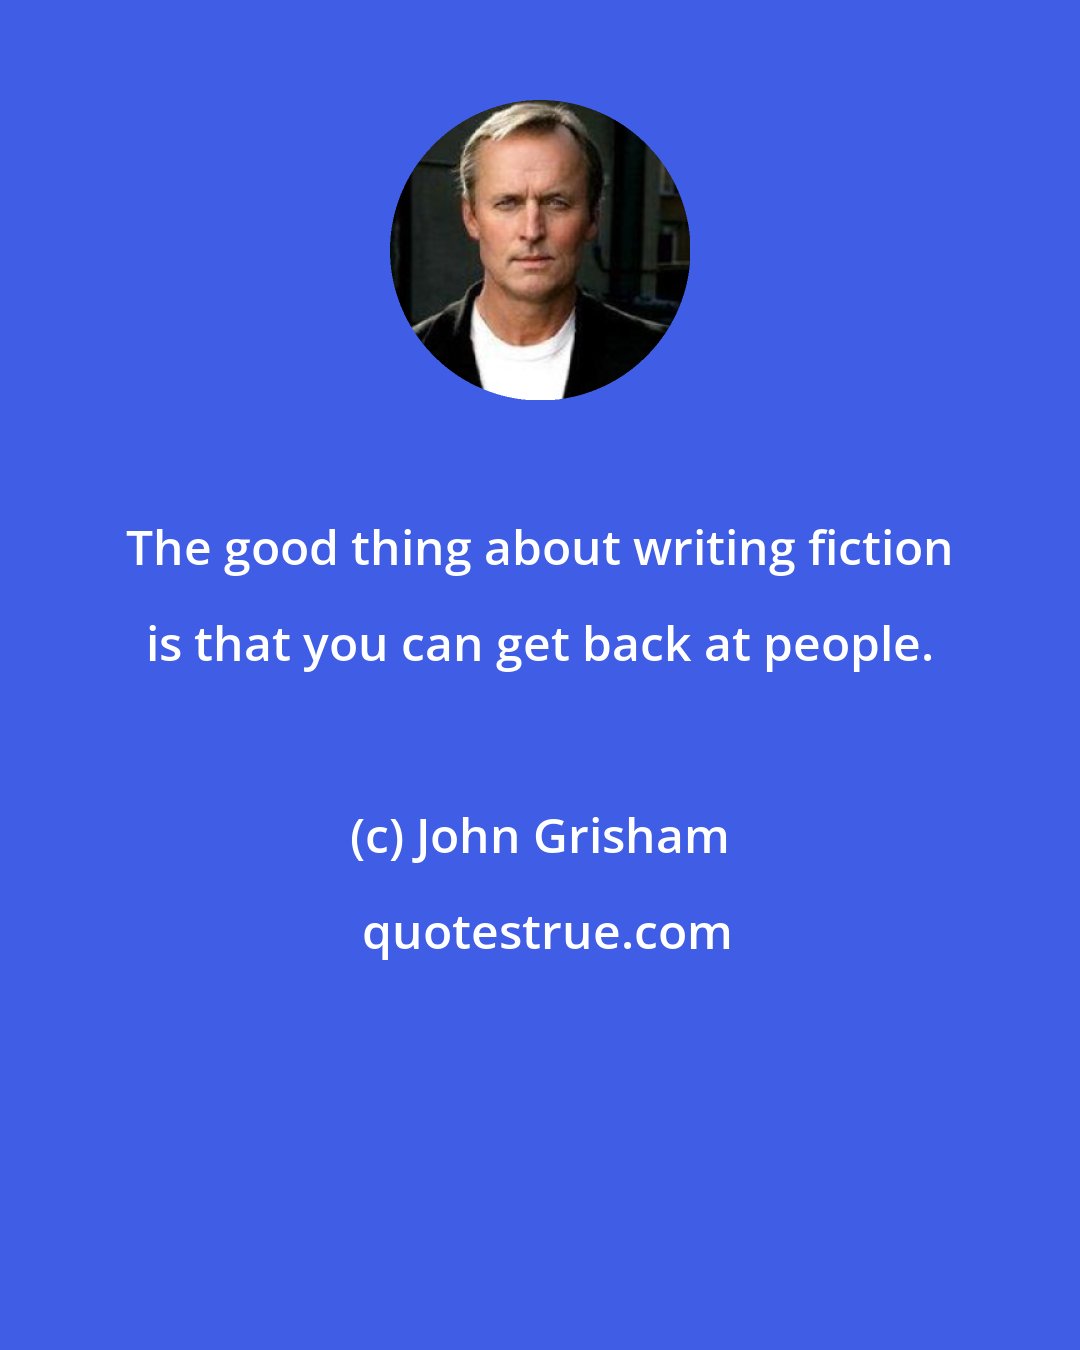 John Grisham: The good thing about writing fiction is that you can get back at people.